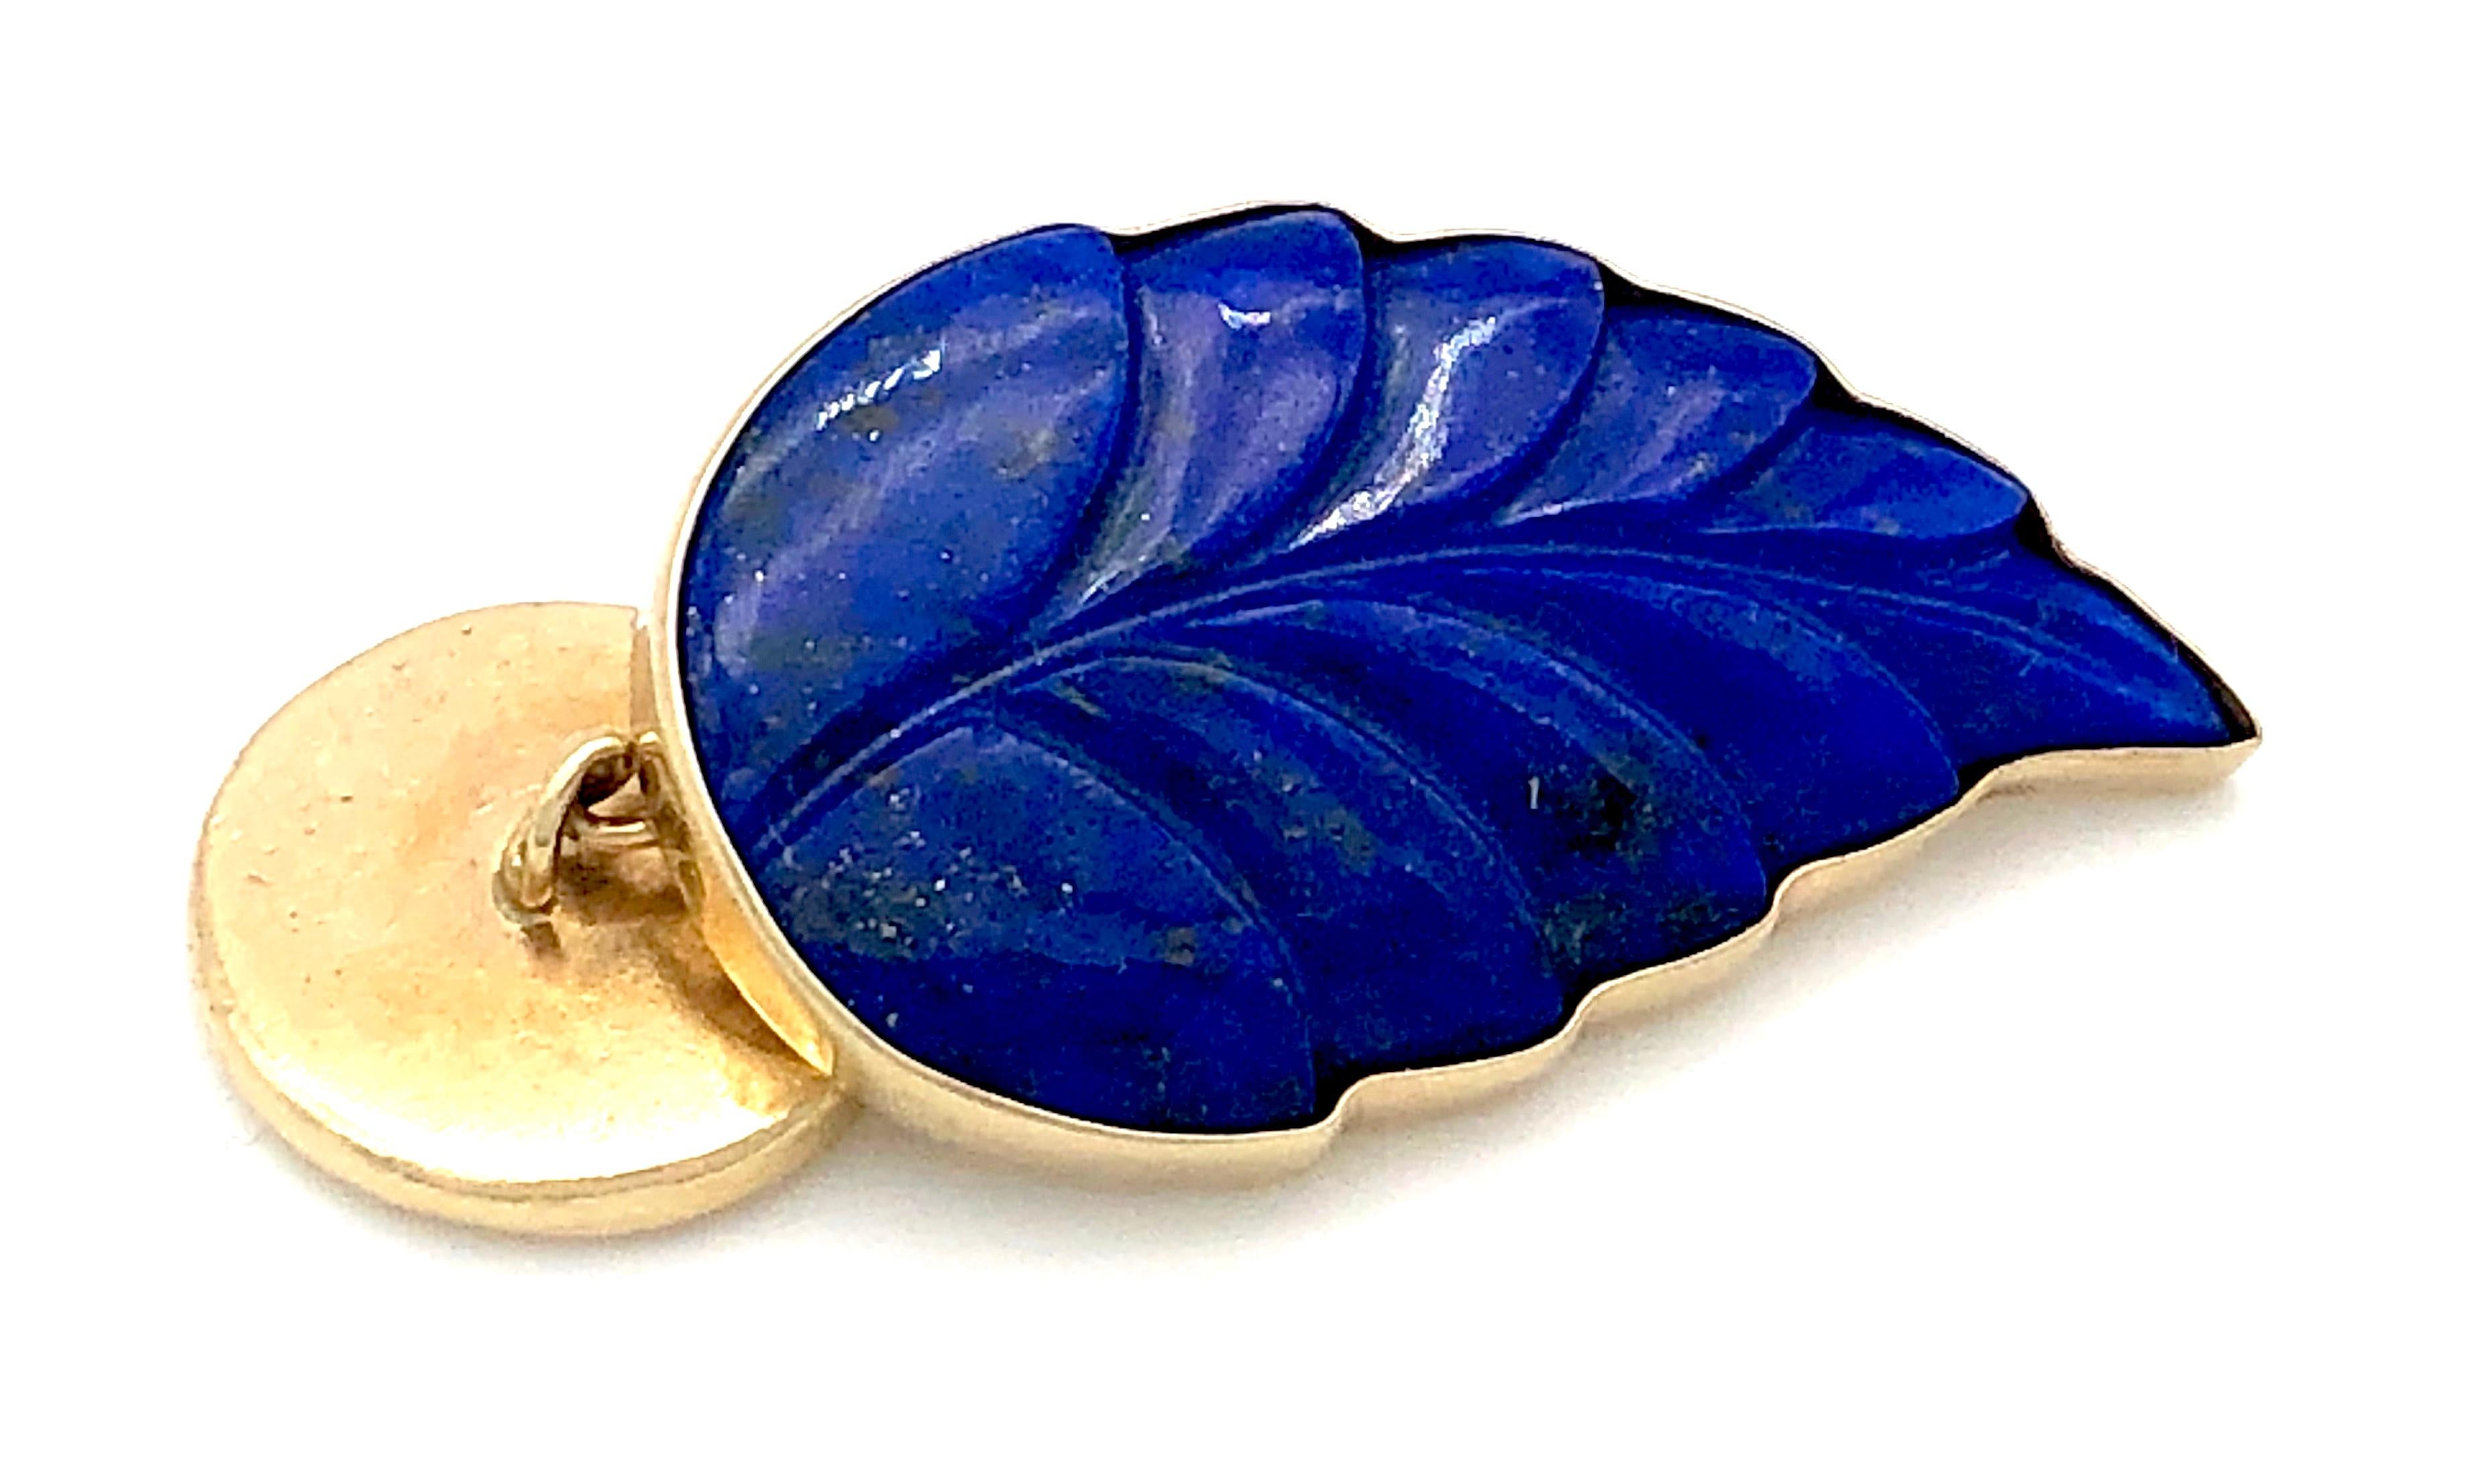 Vintage cufflinks in the shape of leaves made of fine vivid blue carved lapis lazuli mounted in 14kt gold. 